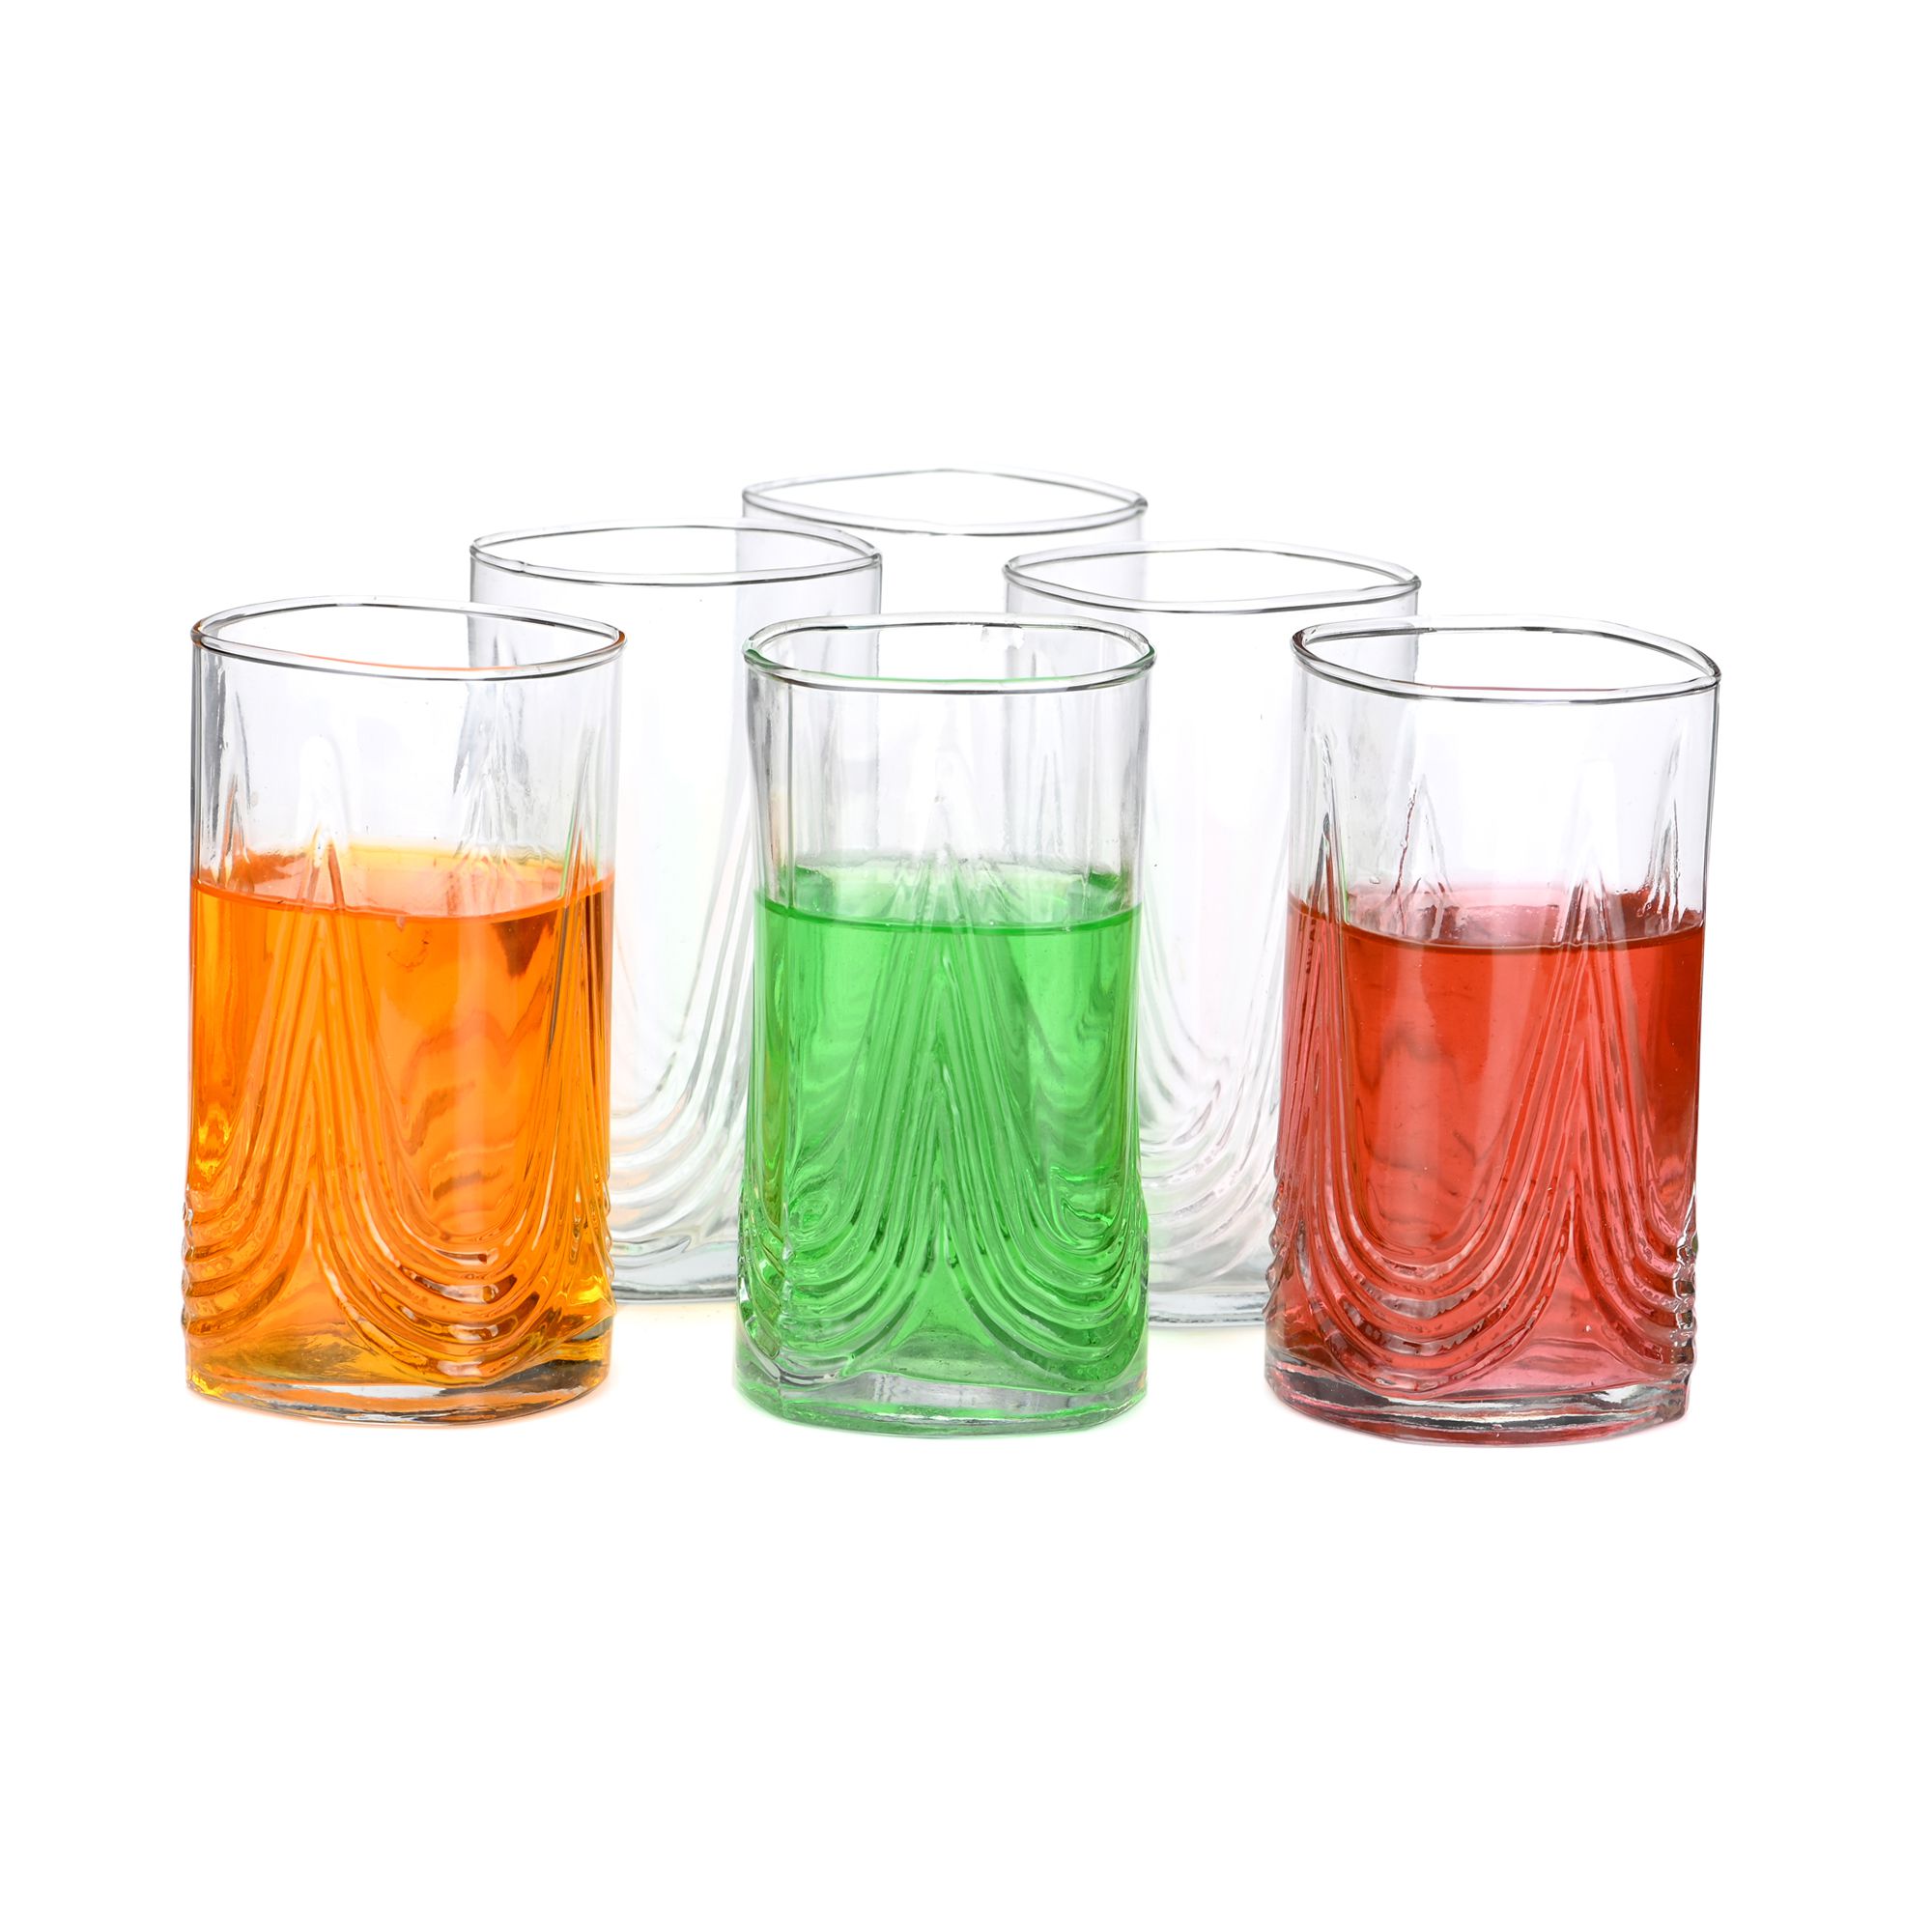 Somil Glass 330 ml Glasses: Buy Online at Best Price in India - Snapdeal